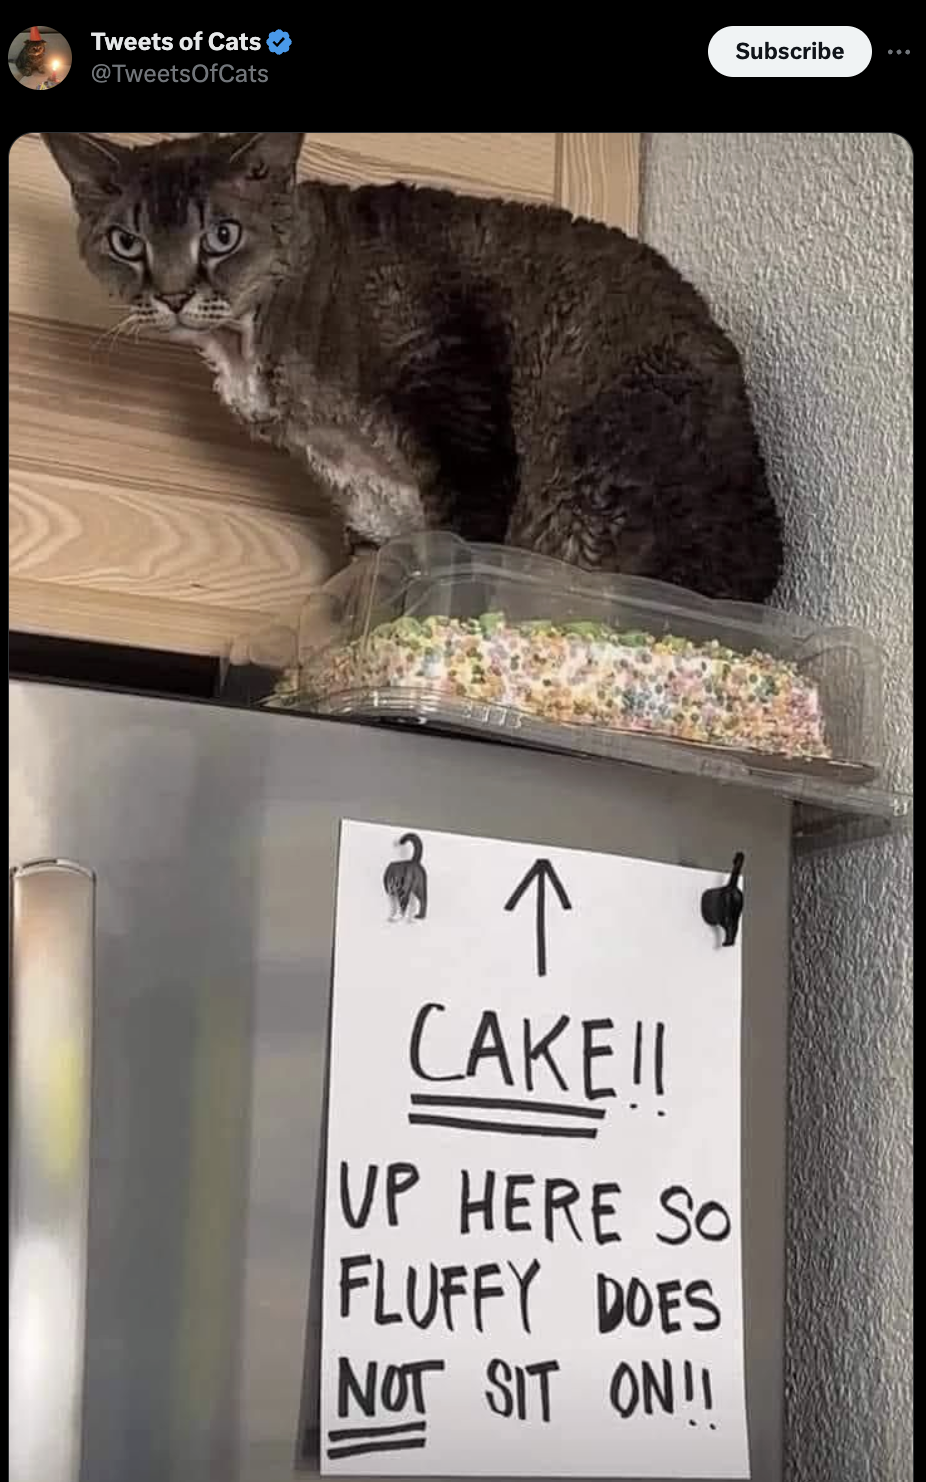 note on the fridge that says, cake up here so fluffy does not sit on, but the cat is sitting on it